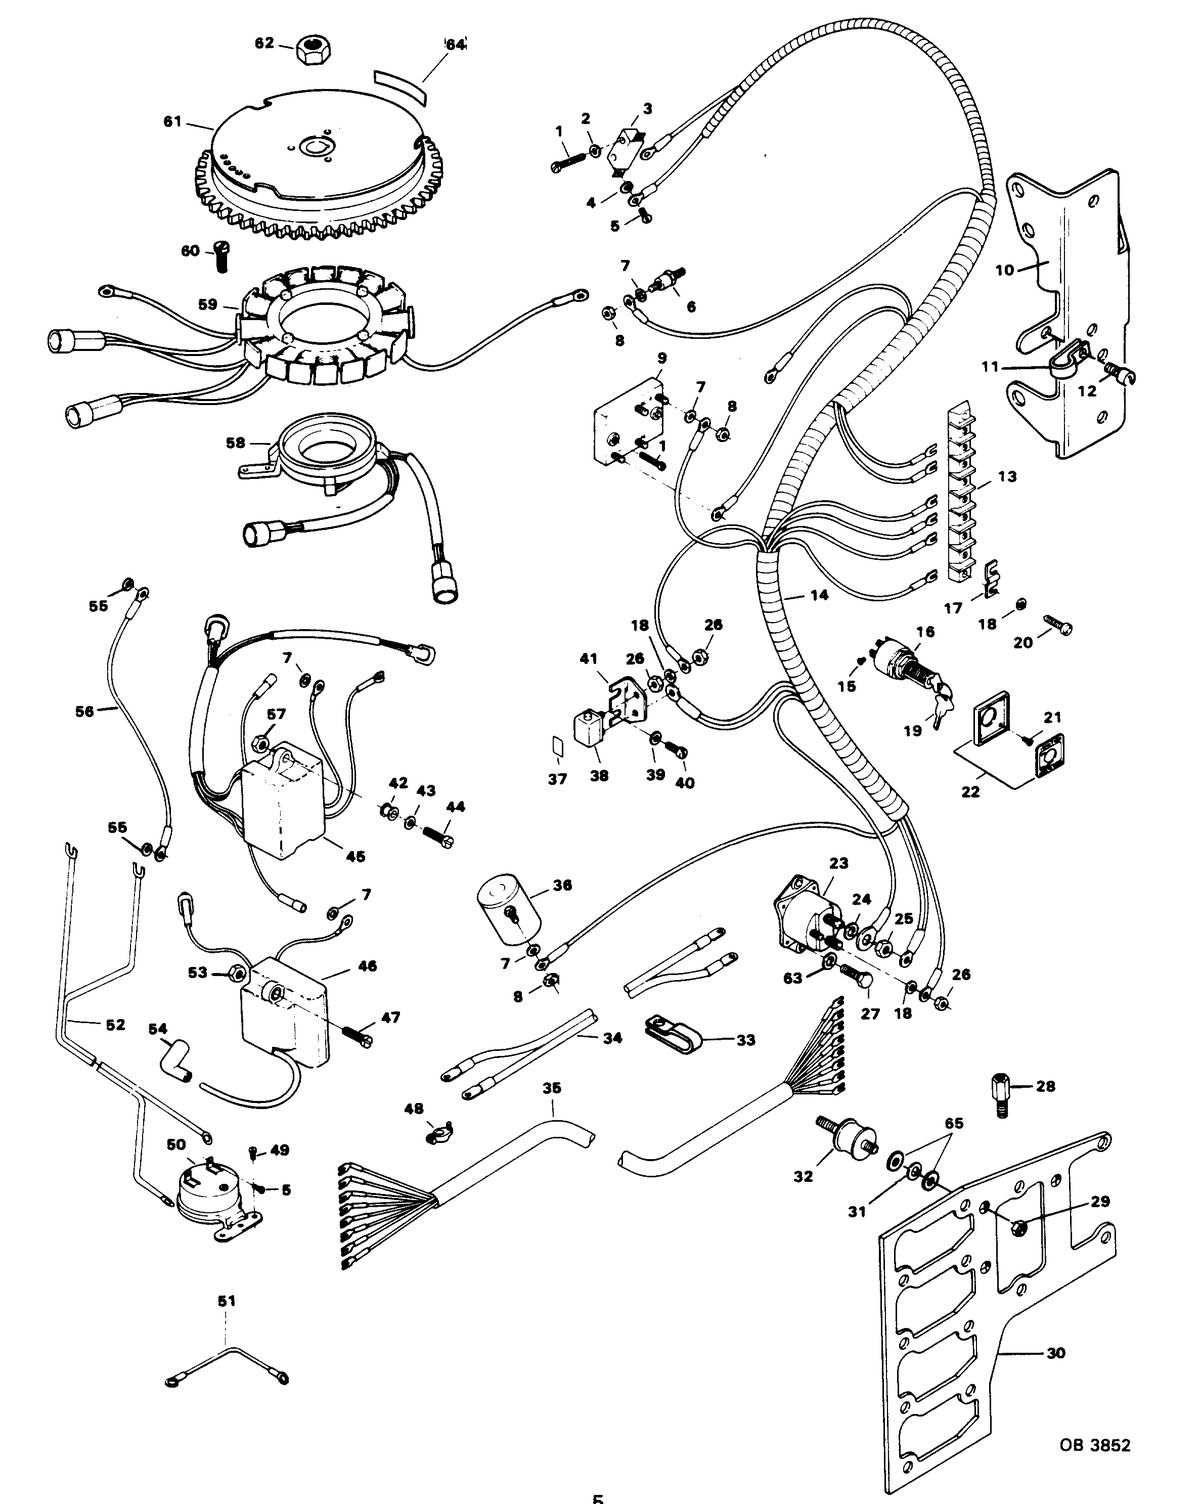 CHRYSLER 90 H.P. ELECTRICAL COMPONENTS